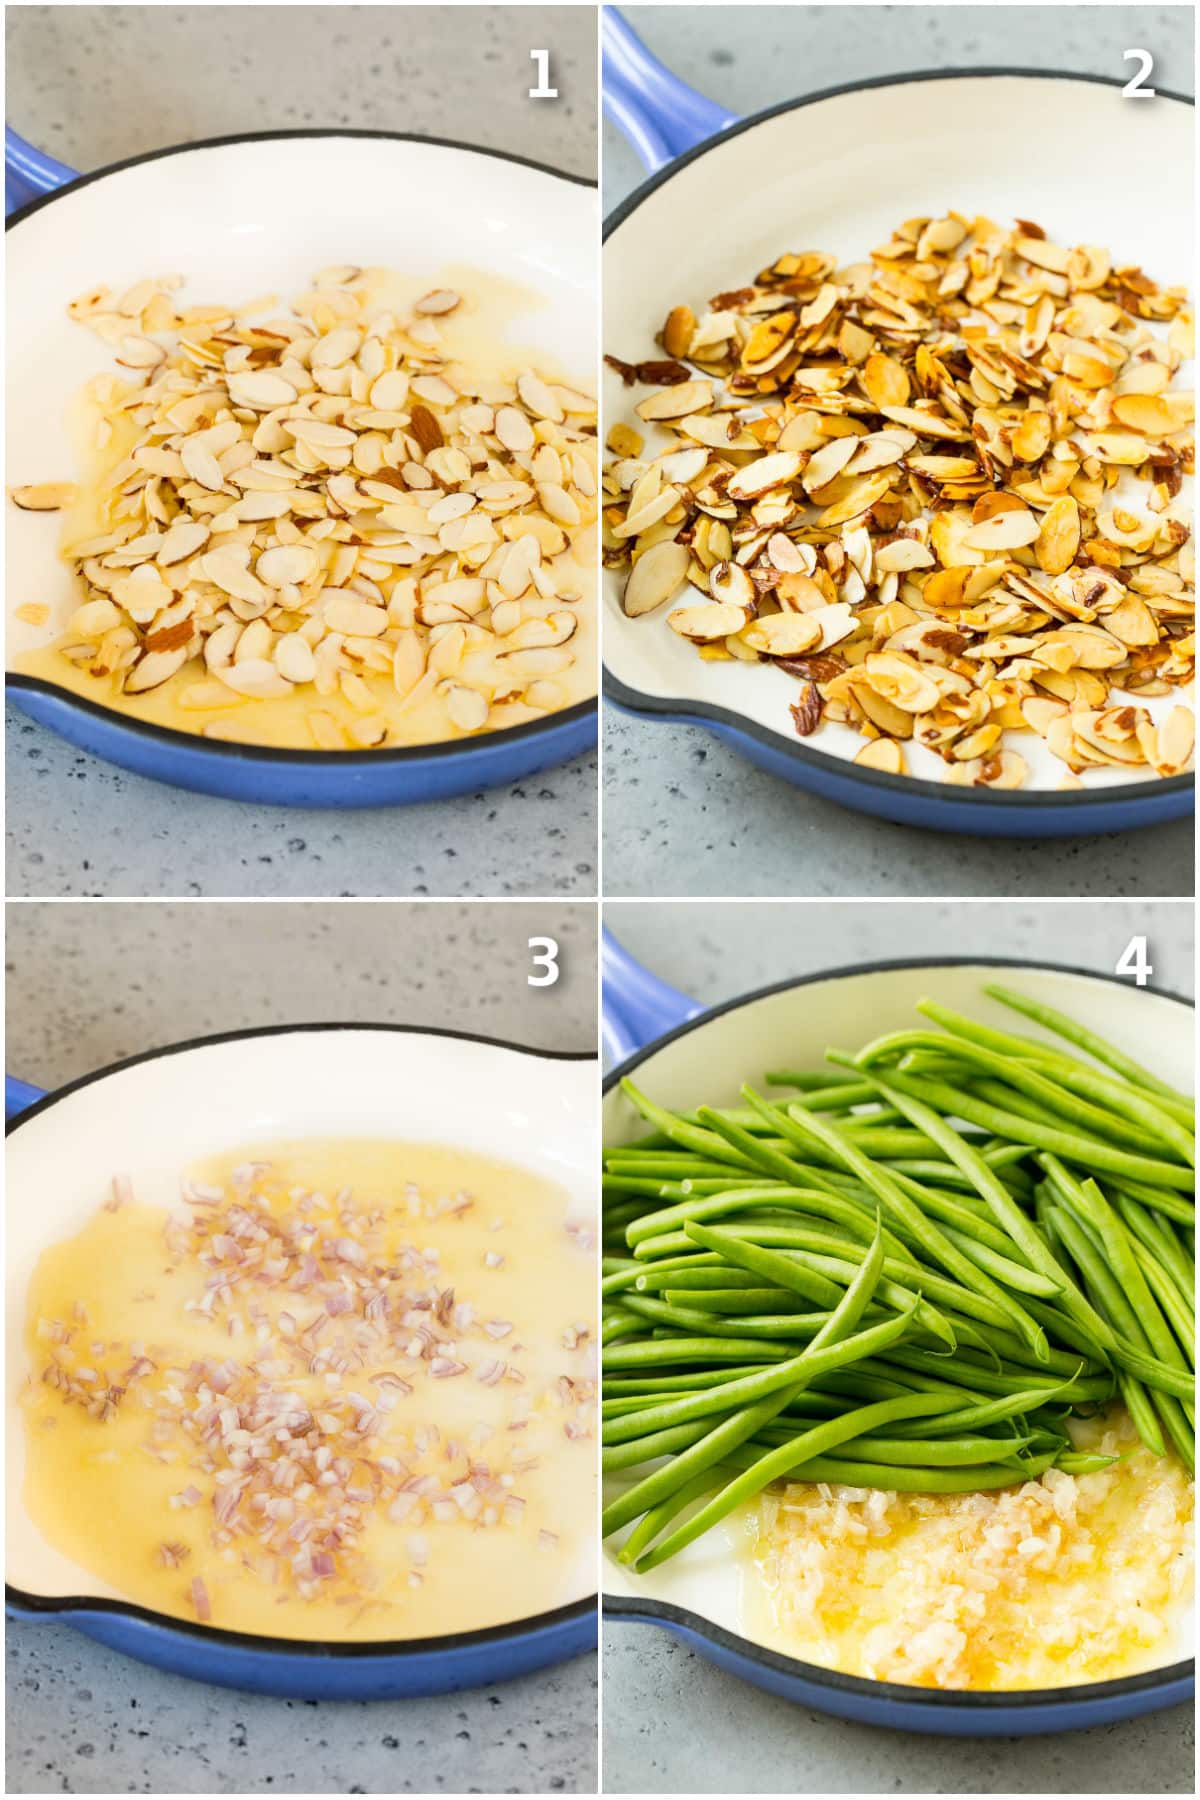 Step by step process shots showing how to cook almonds, shallots and green beans.